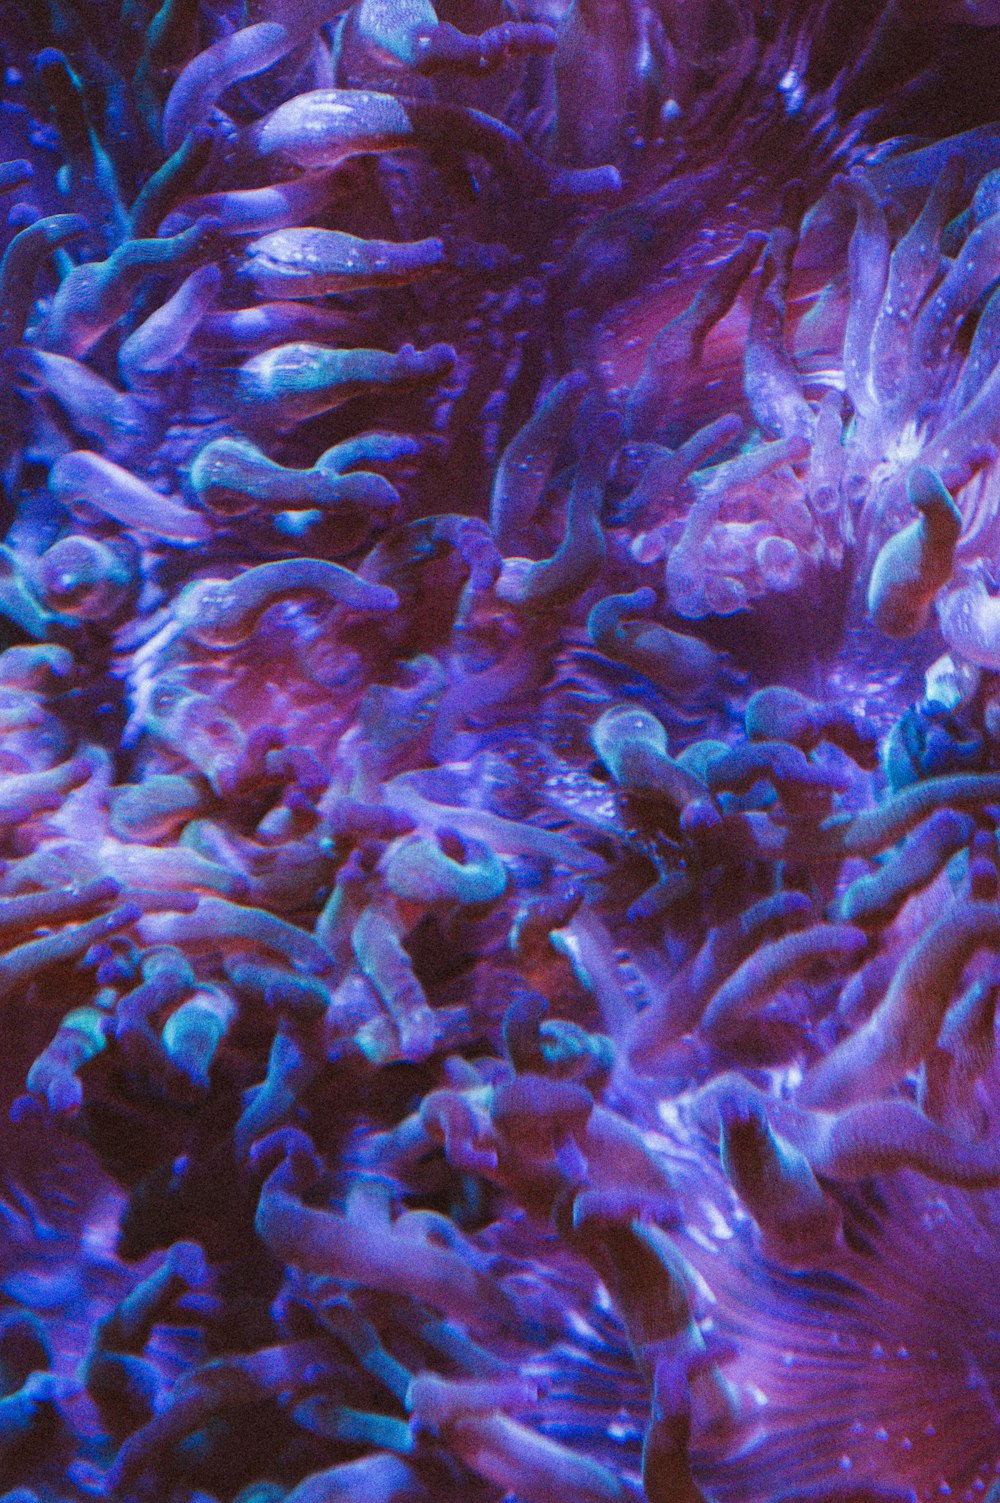 a close up of a purple and blue sea anemone